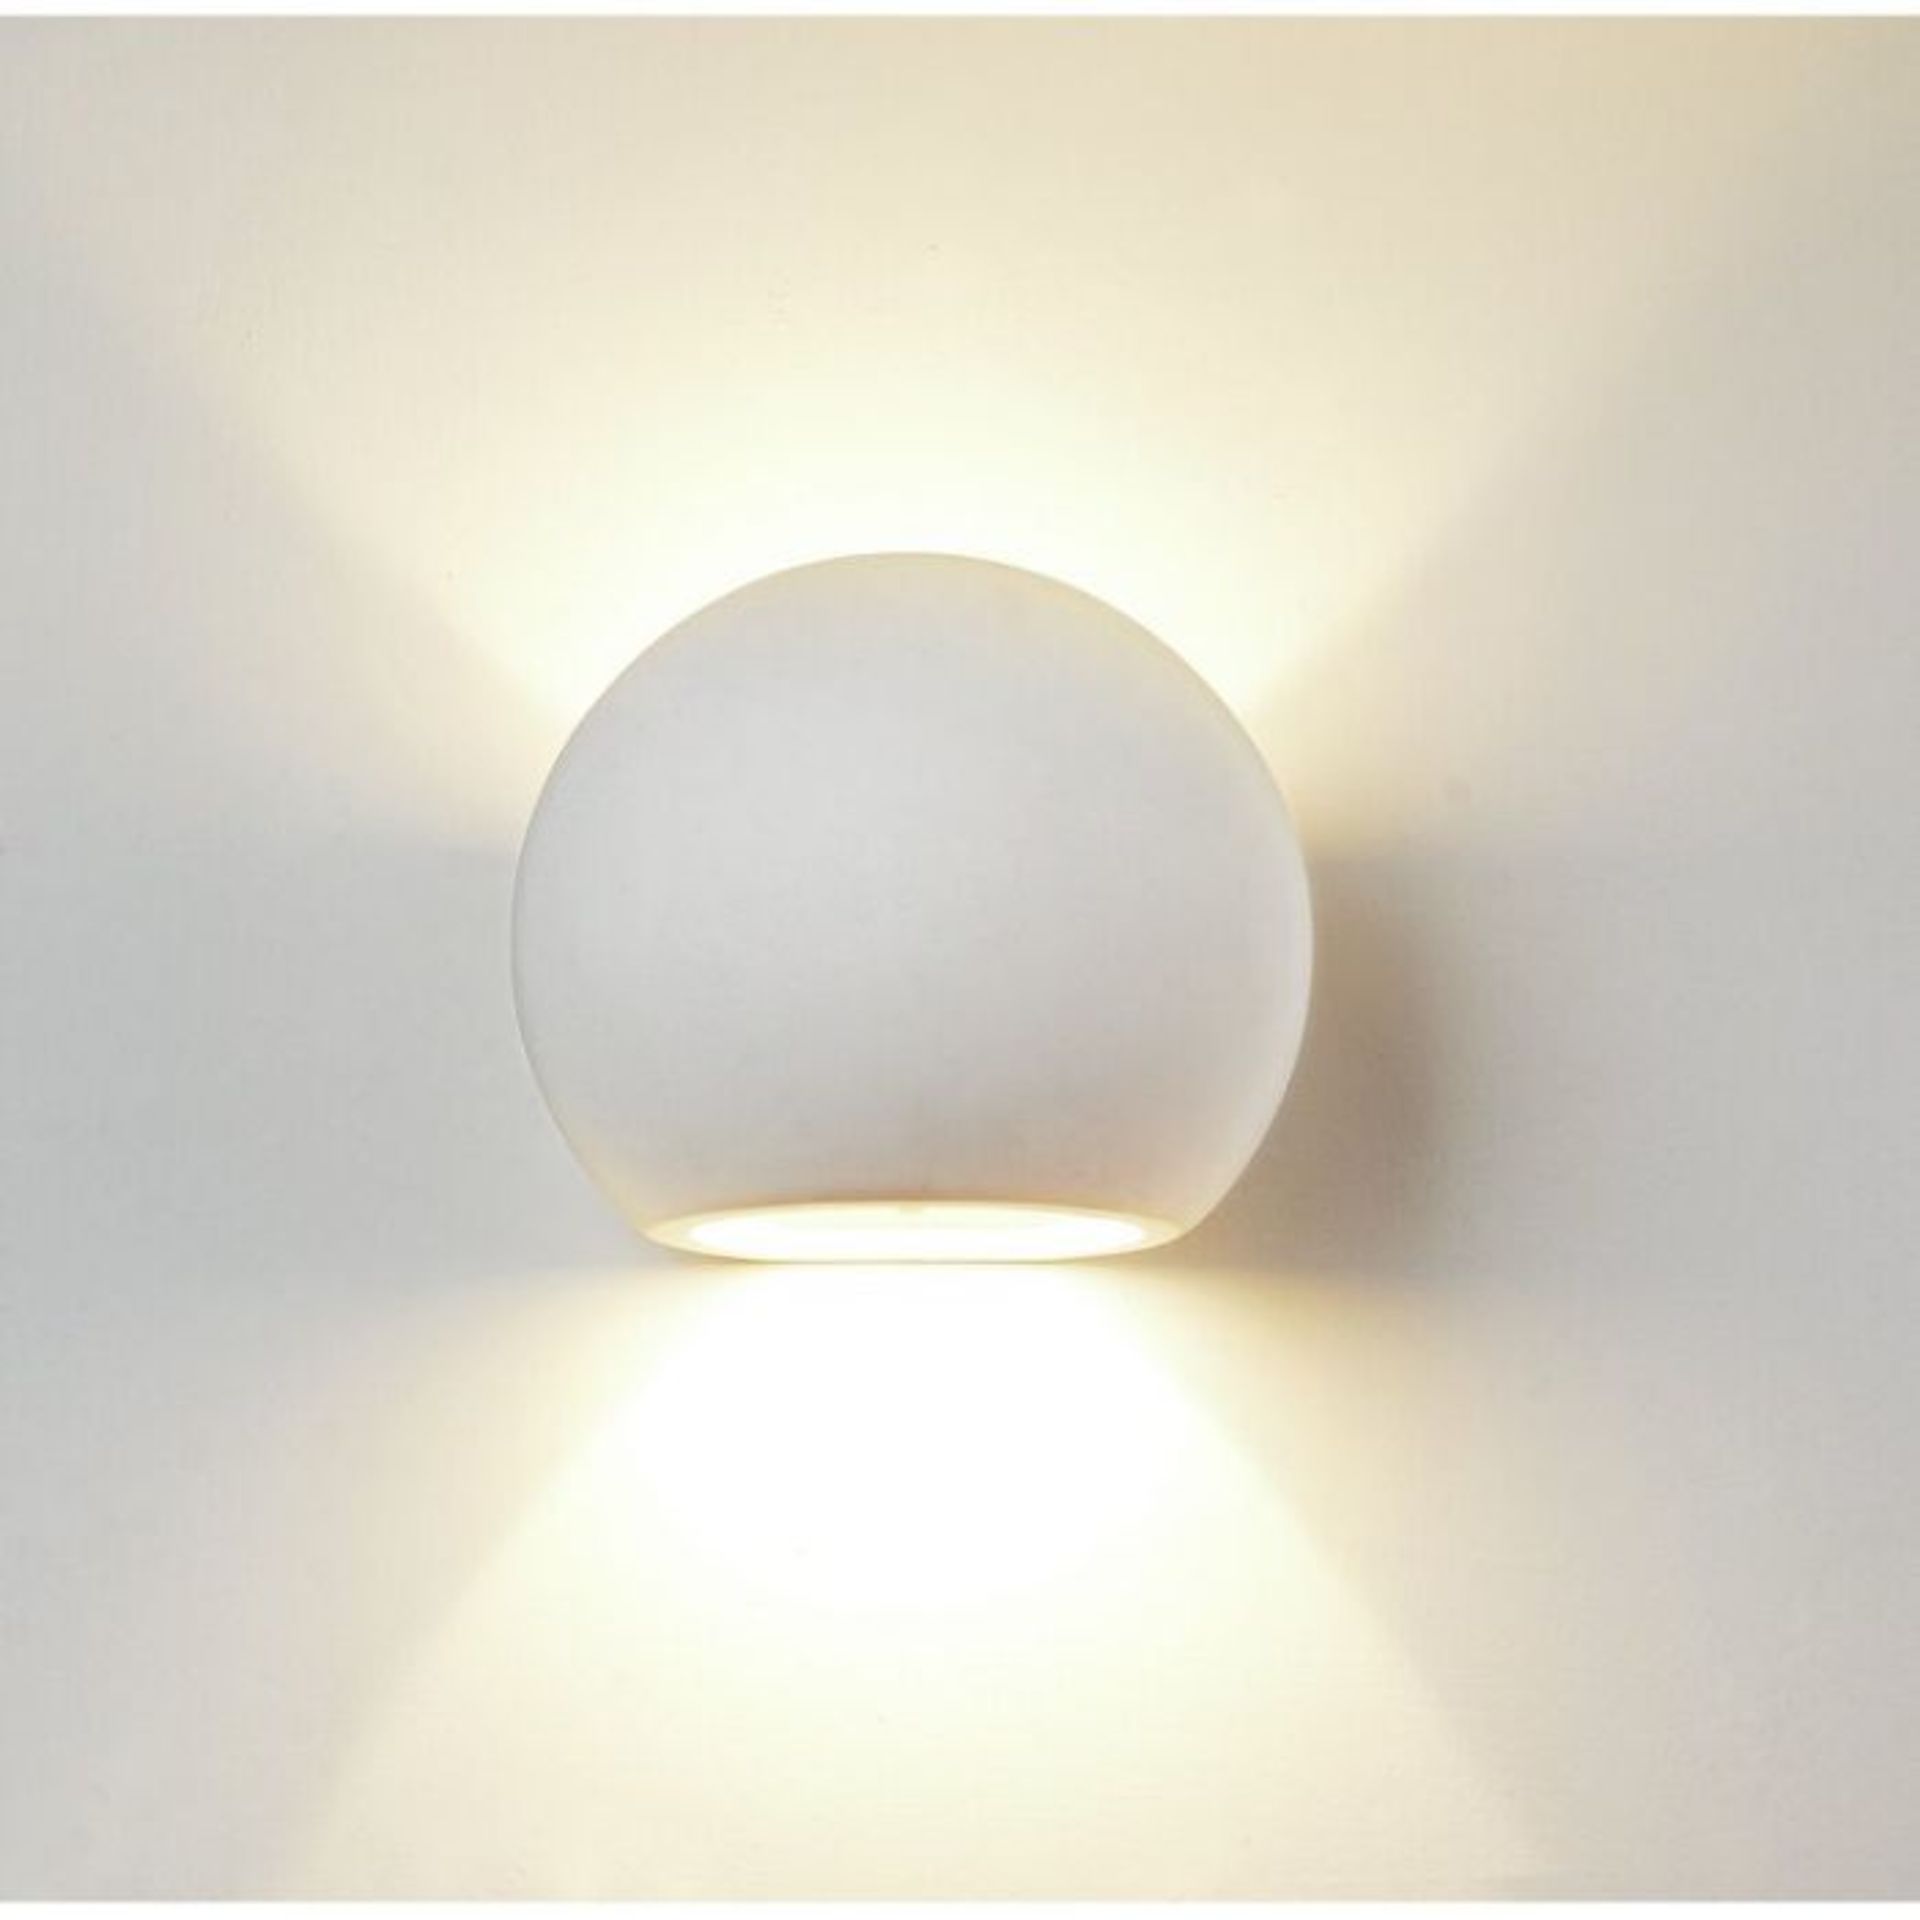 17 Stories, Blandford 1-Light Up and Downlight (PLASTER WHITE) - RRP £34.99 (BDHM1049 - 26509/54)